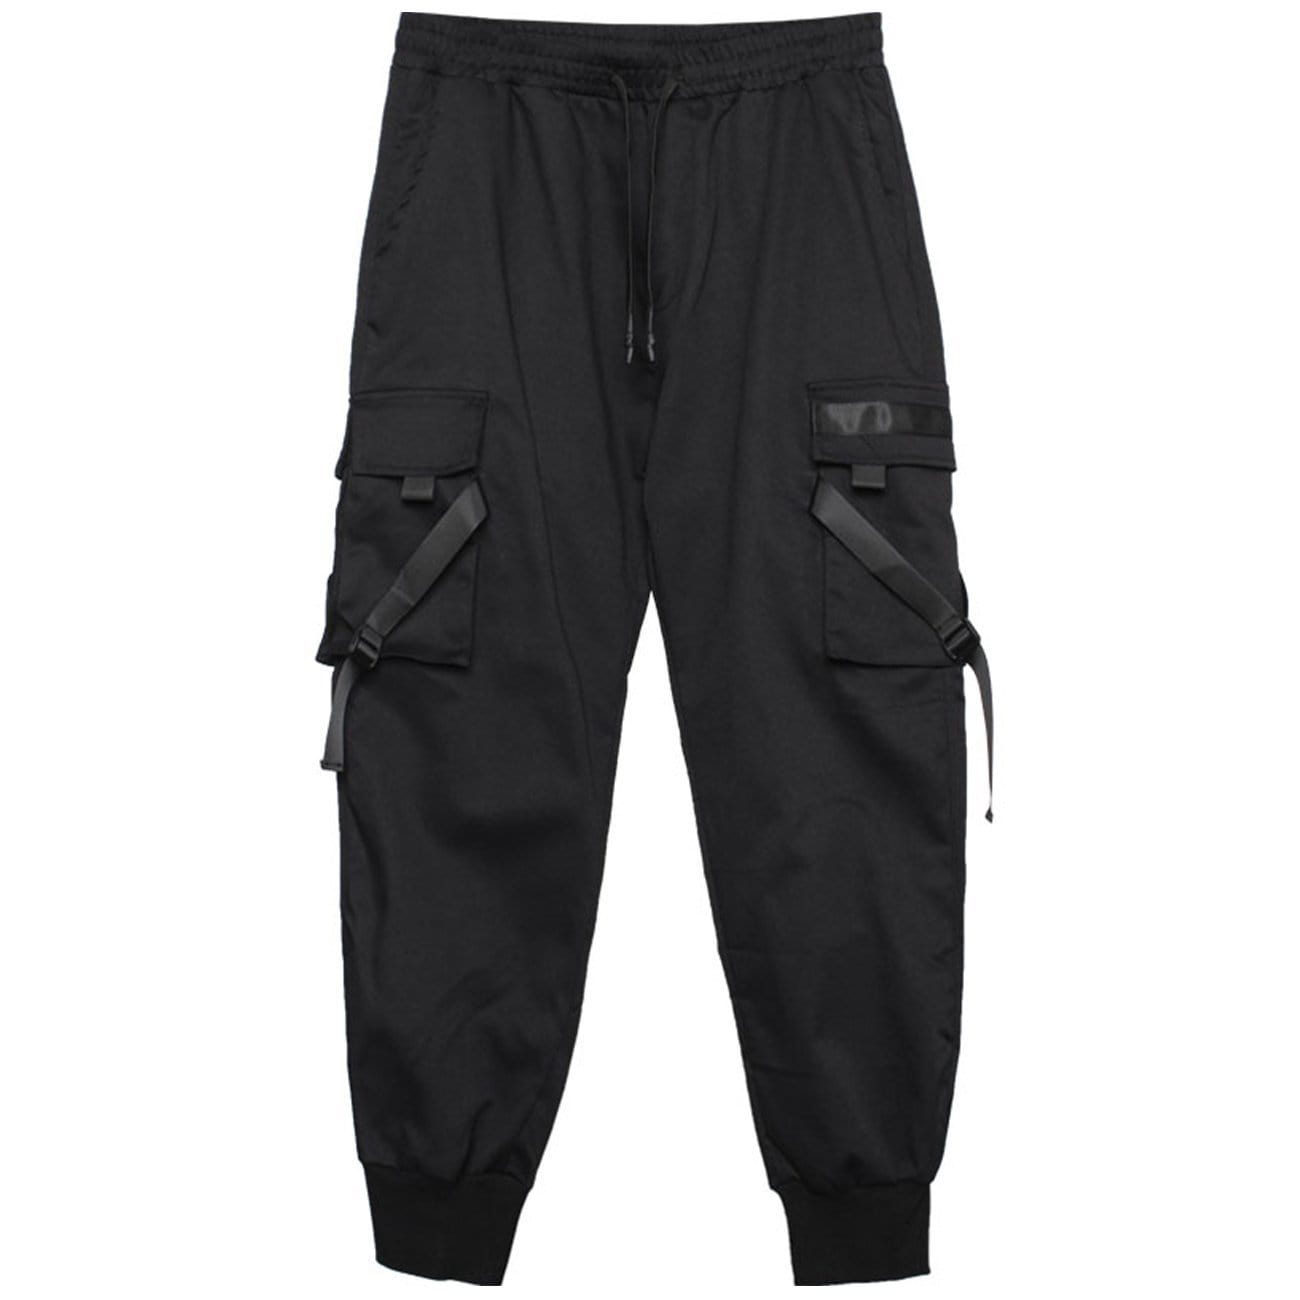 TO Multi Pockets Ribbons Cargo Pants